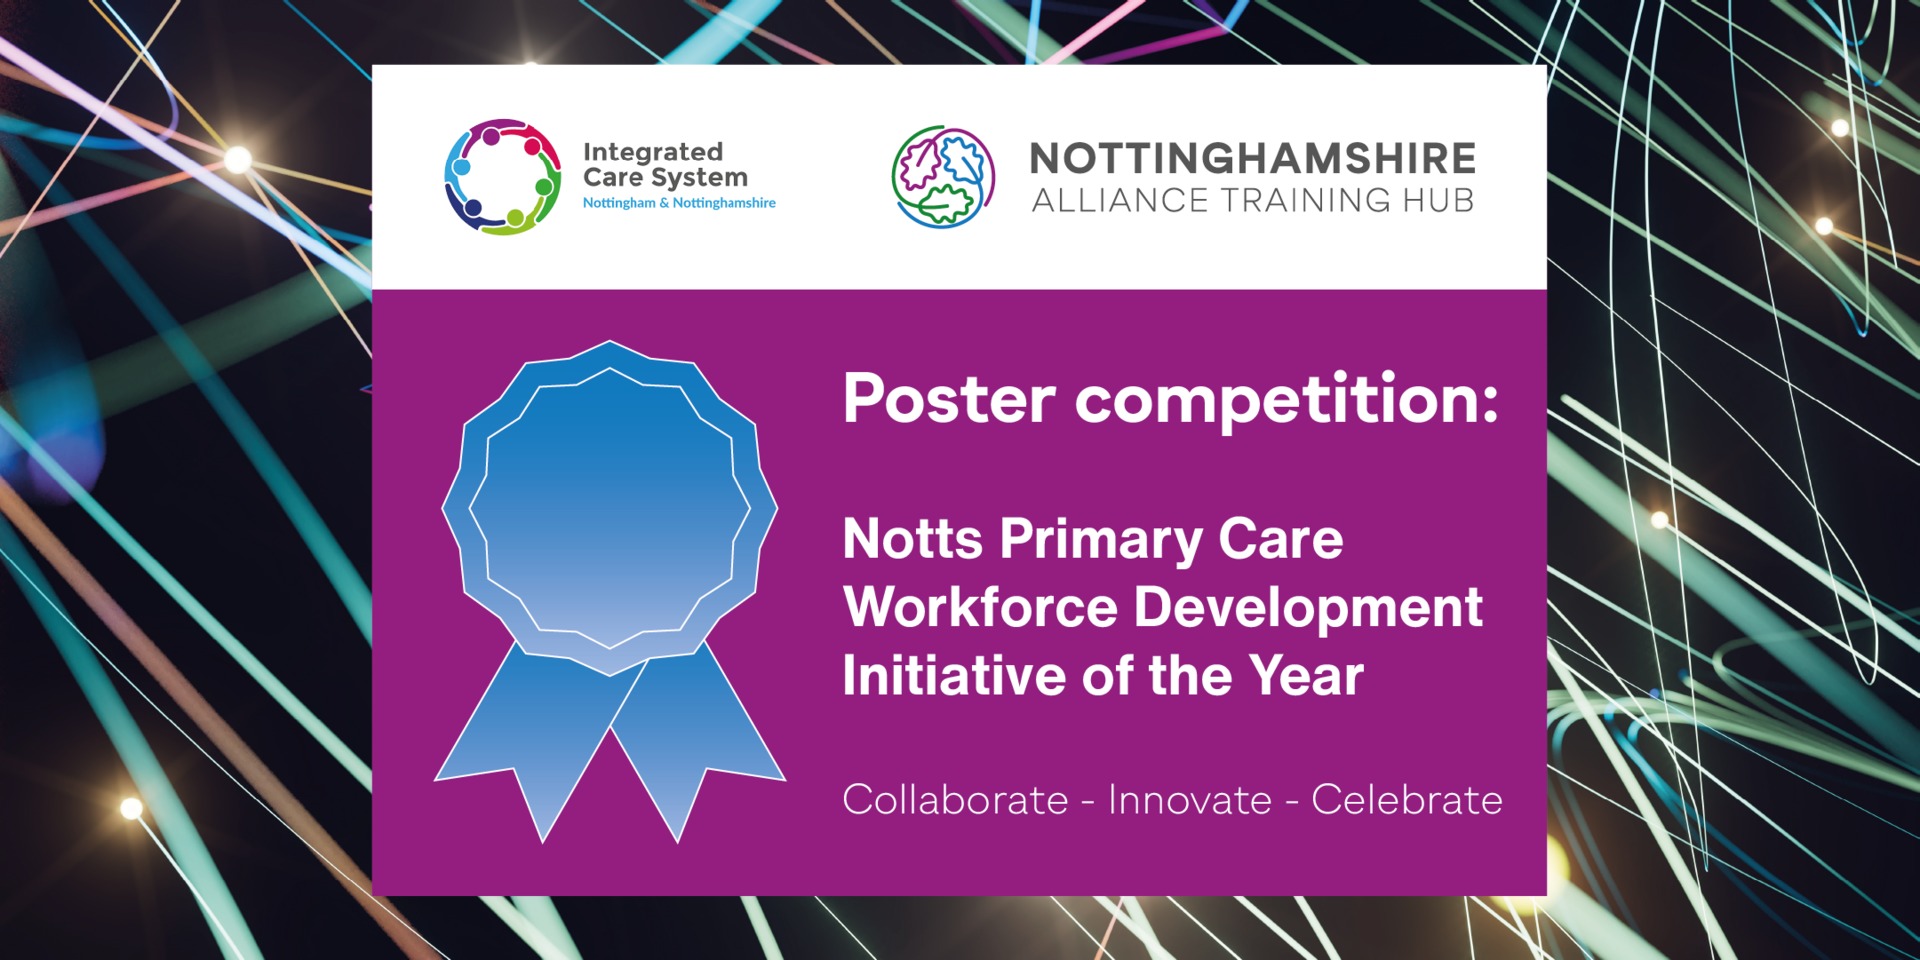 Nottingham and Nottinghamshire Integrated Care System. Nottinghamshire Alliance Training Hub. Poster competition: Notts Primary Care Workforce Development Initiative of the Year. Collaborate - Innovate - Celebrate.